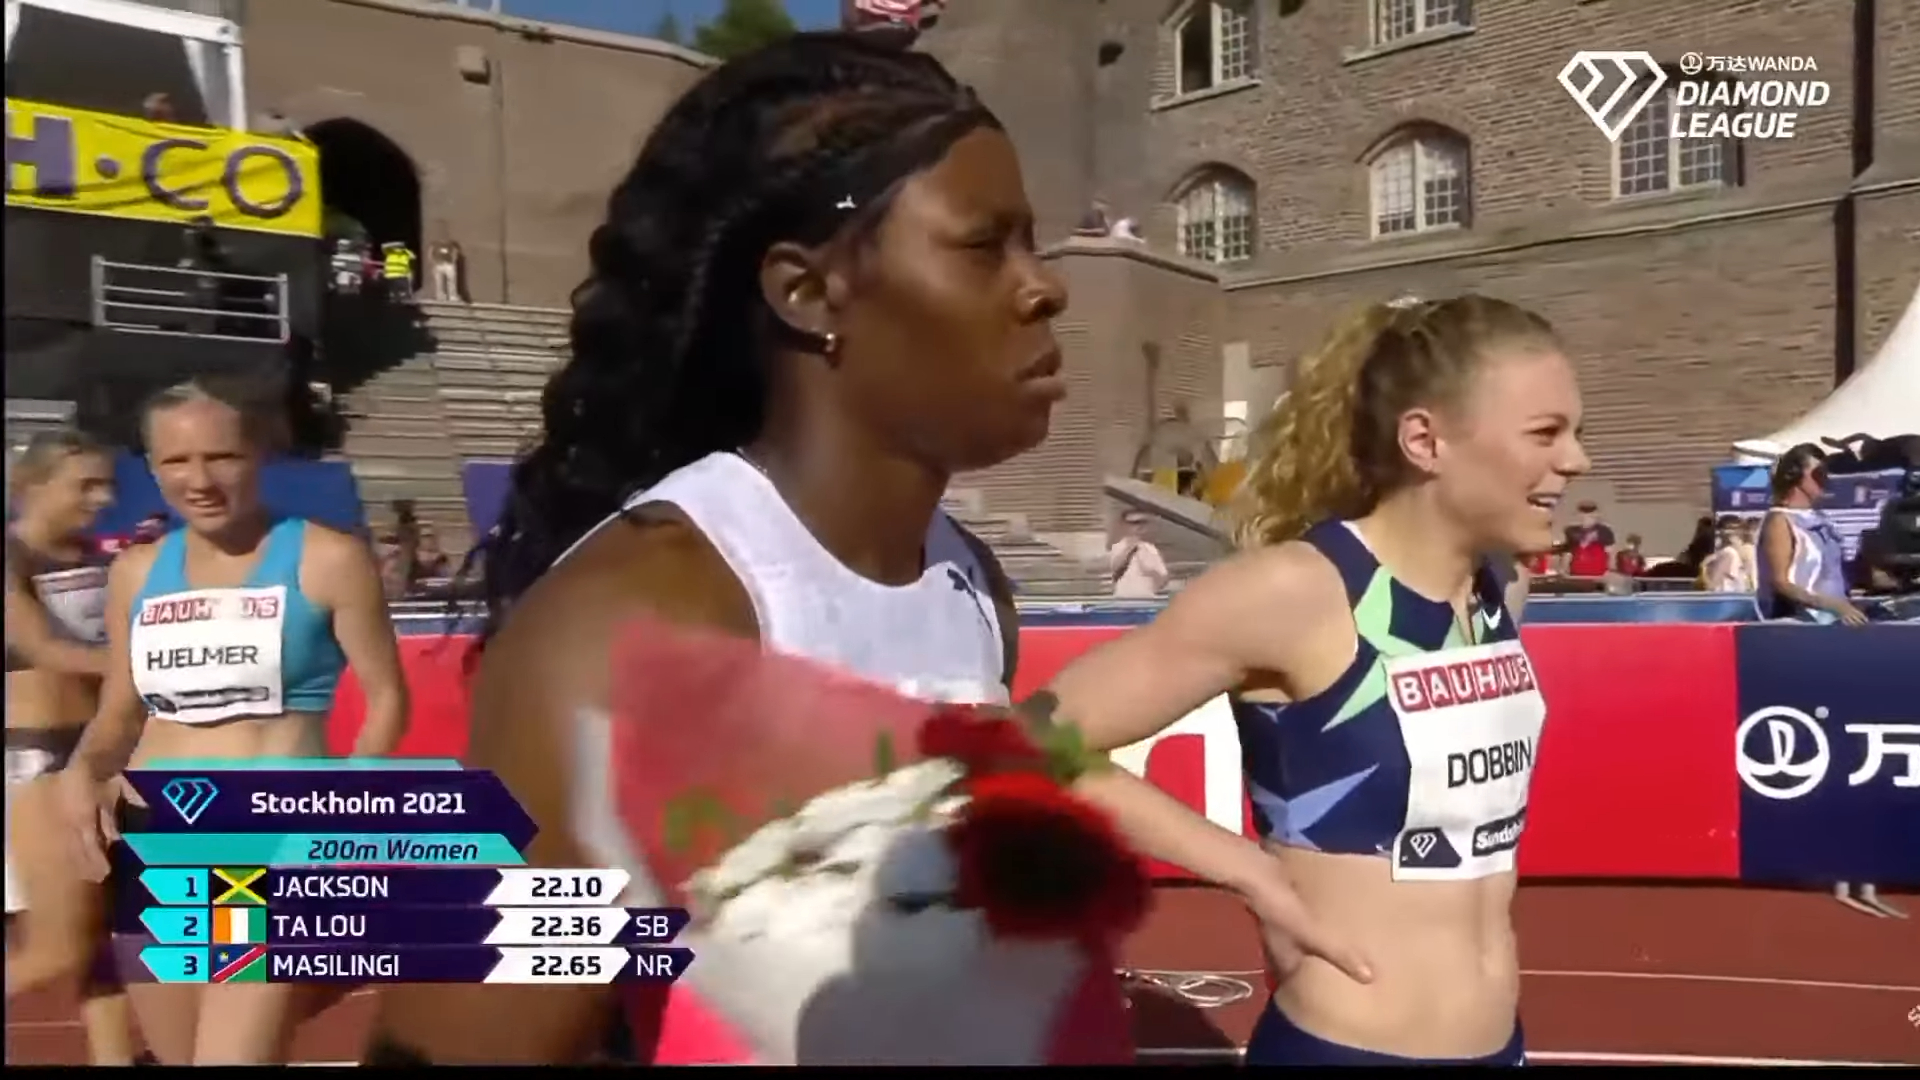 Shericka Jackson ?? wins the Women's 200M at the Stockholm Diamond League in 22.10